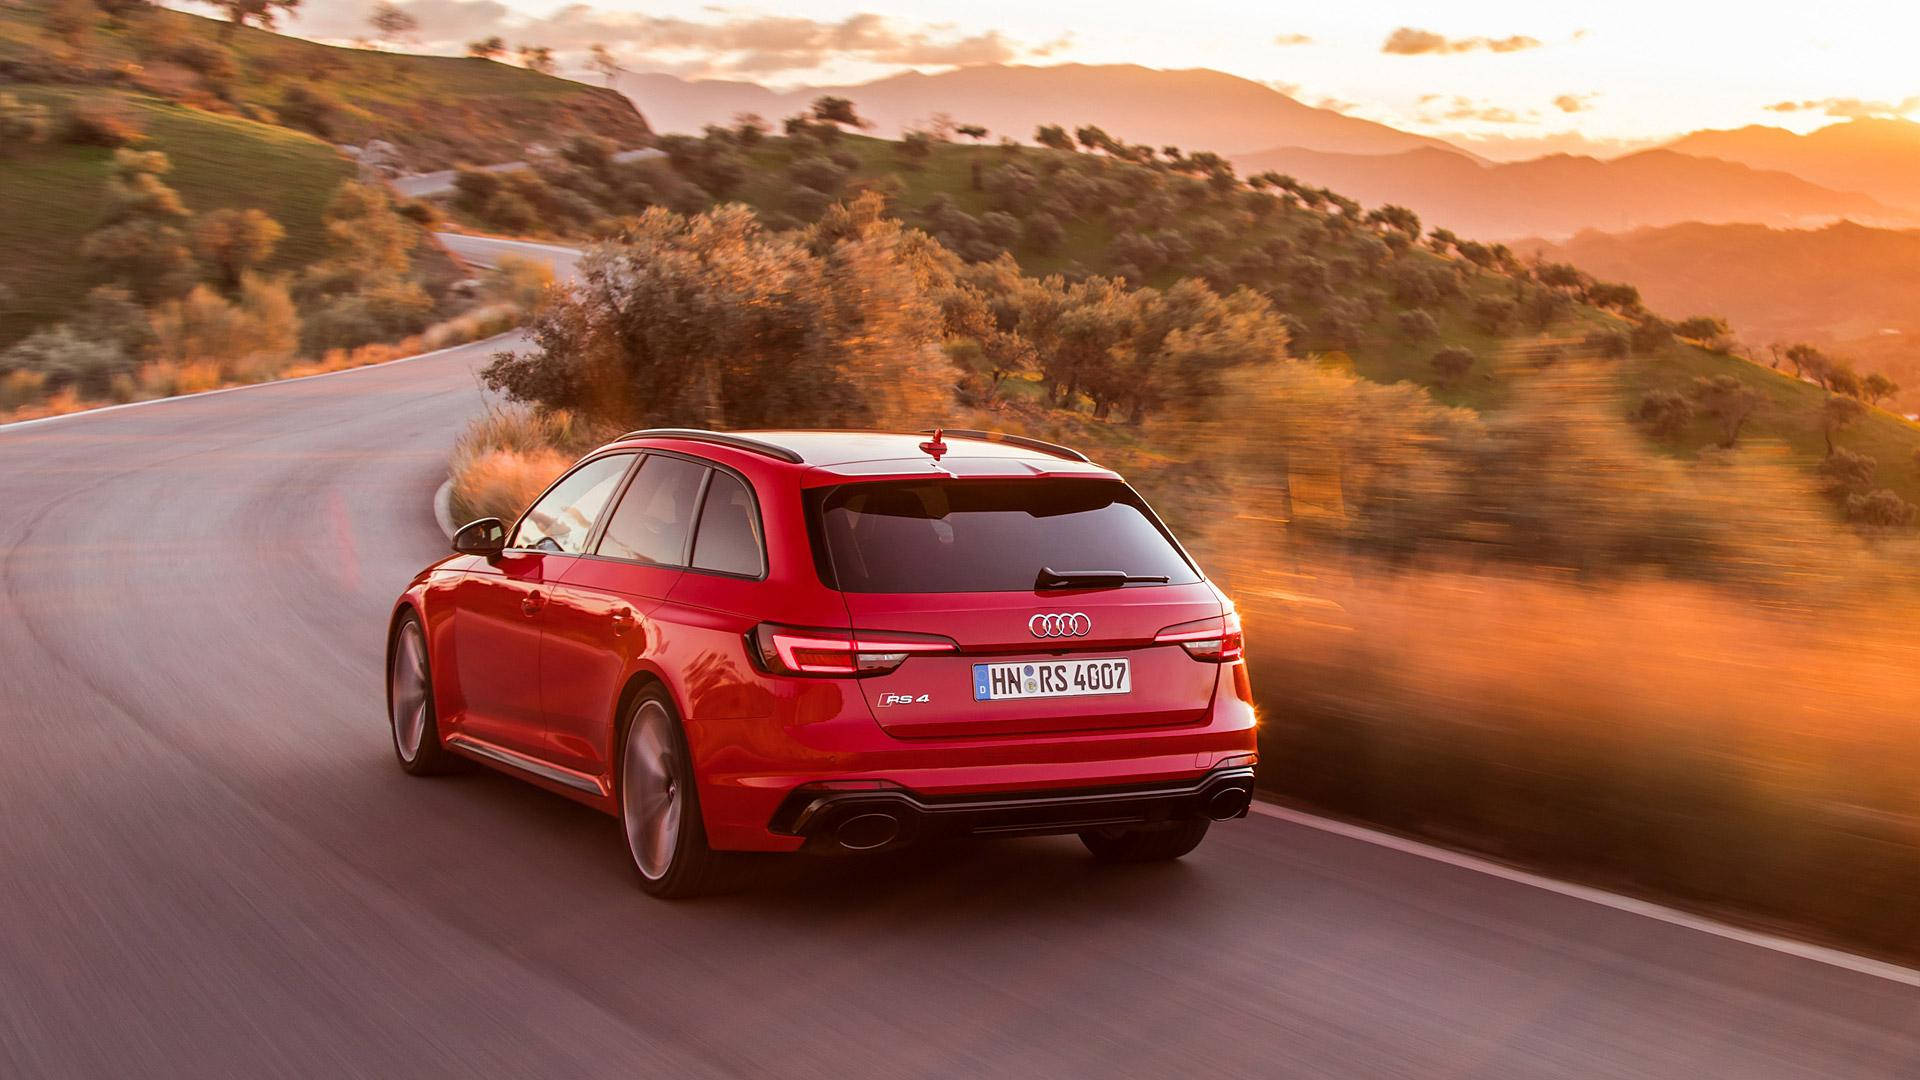 Caption: High-resolution Audi Rs 4 Amid The Winding Trees